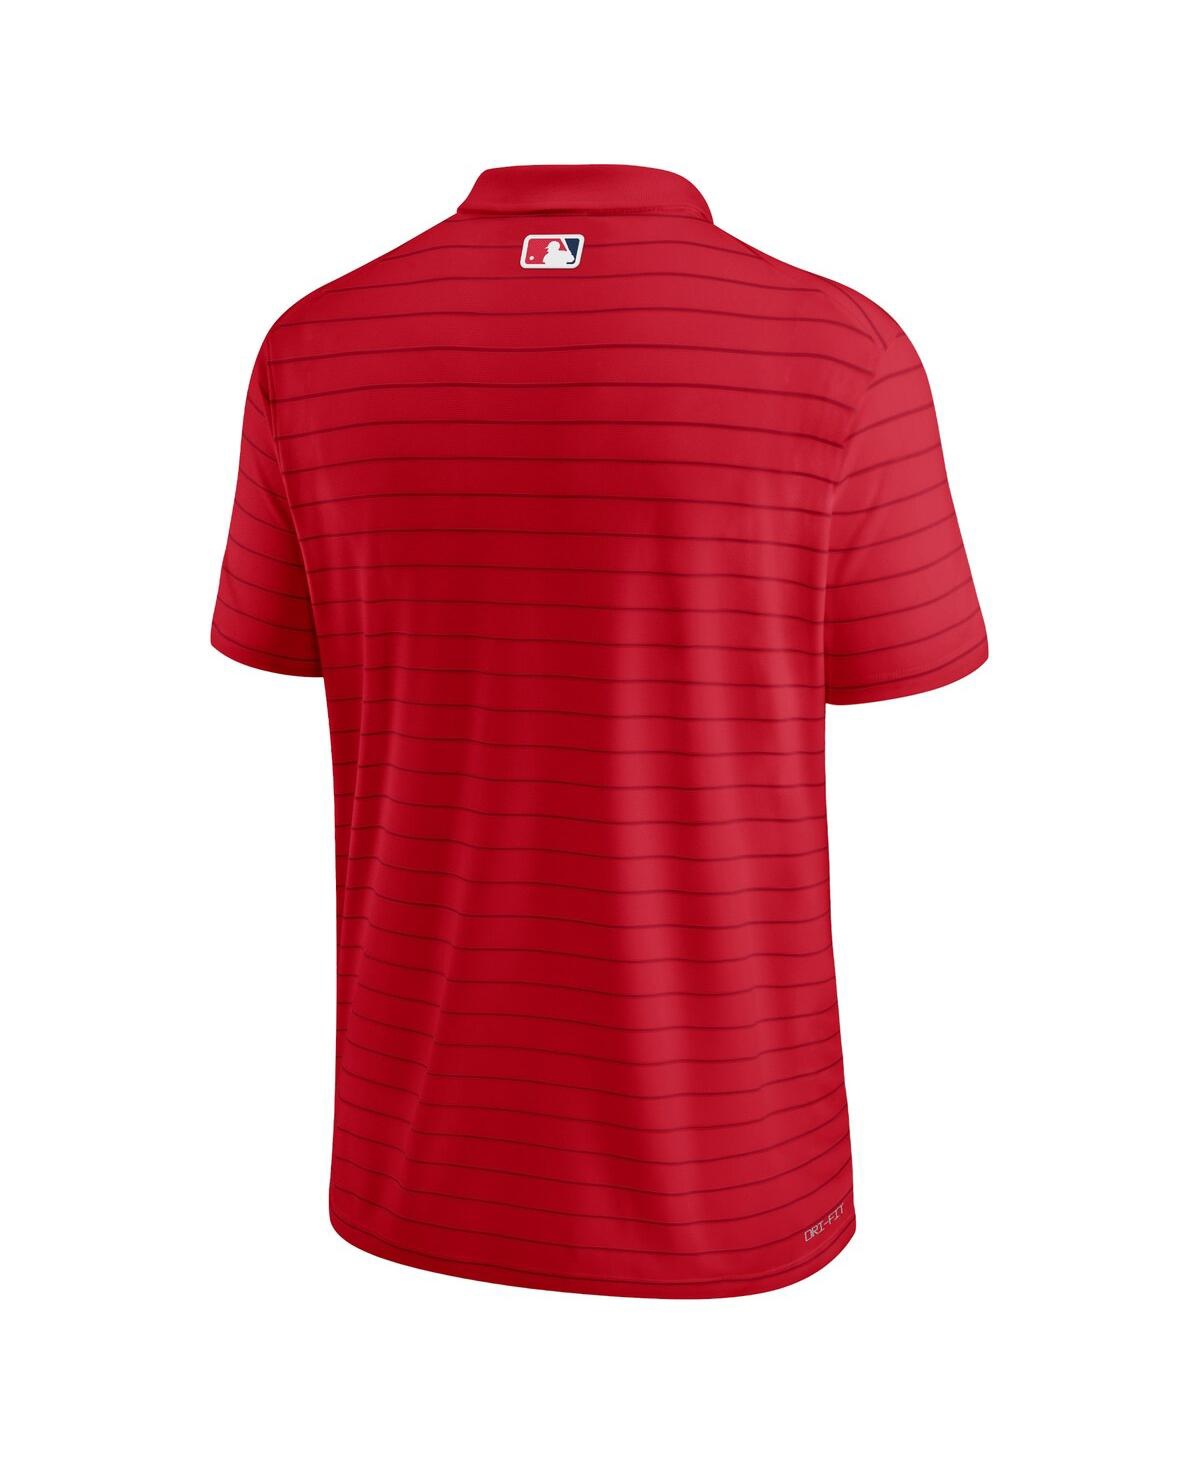 Nike Men's Red Washington Nationals Authentic Collection Victory